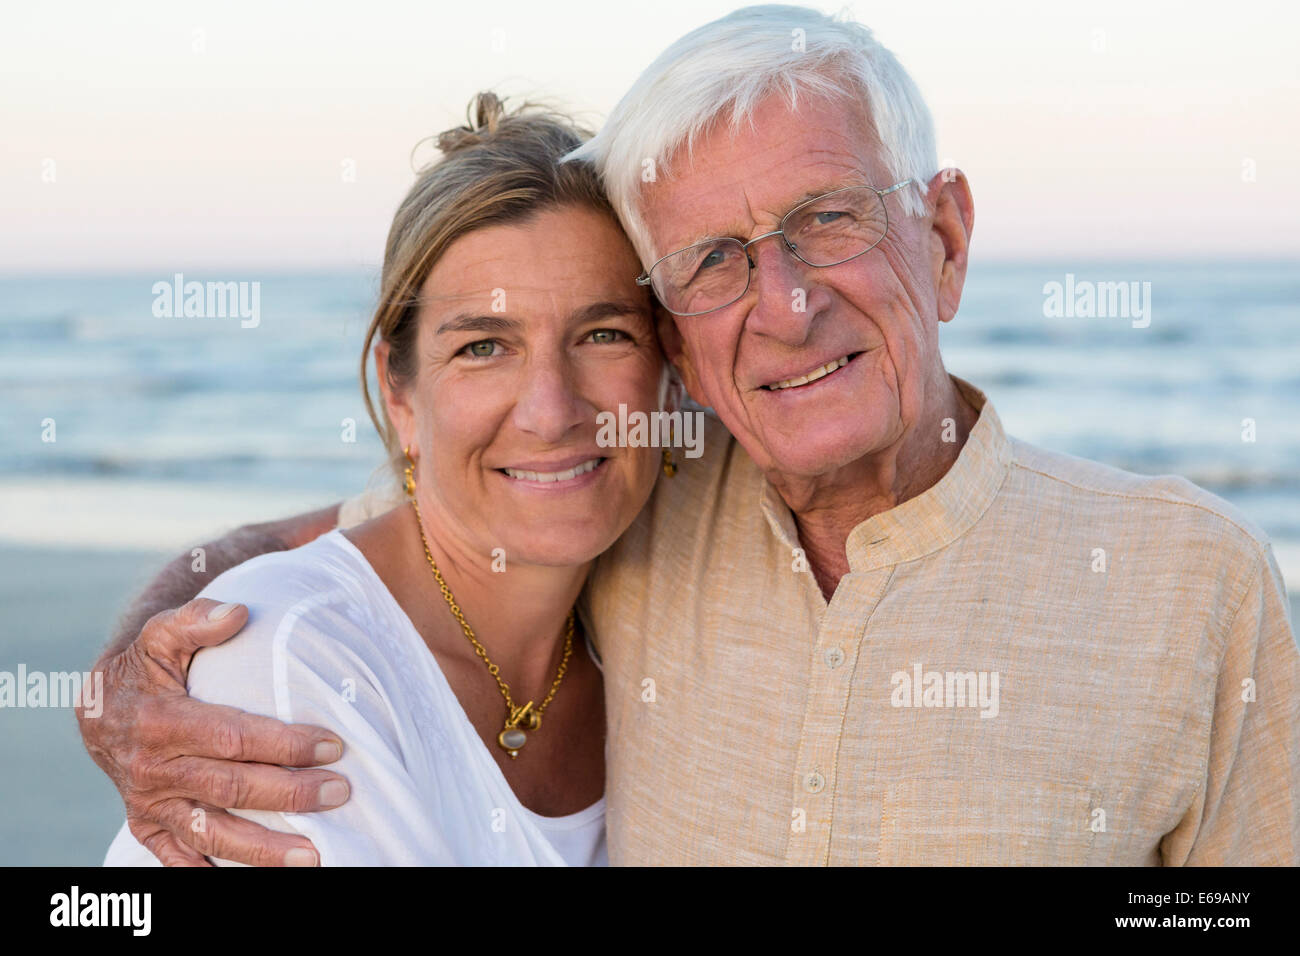 Caucasian father and daughter smiling on beach Banque D'Images